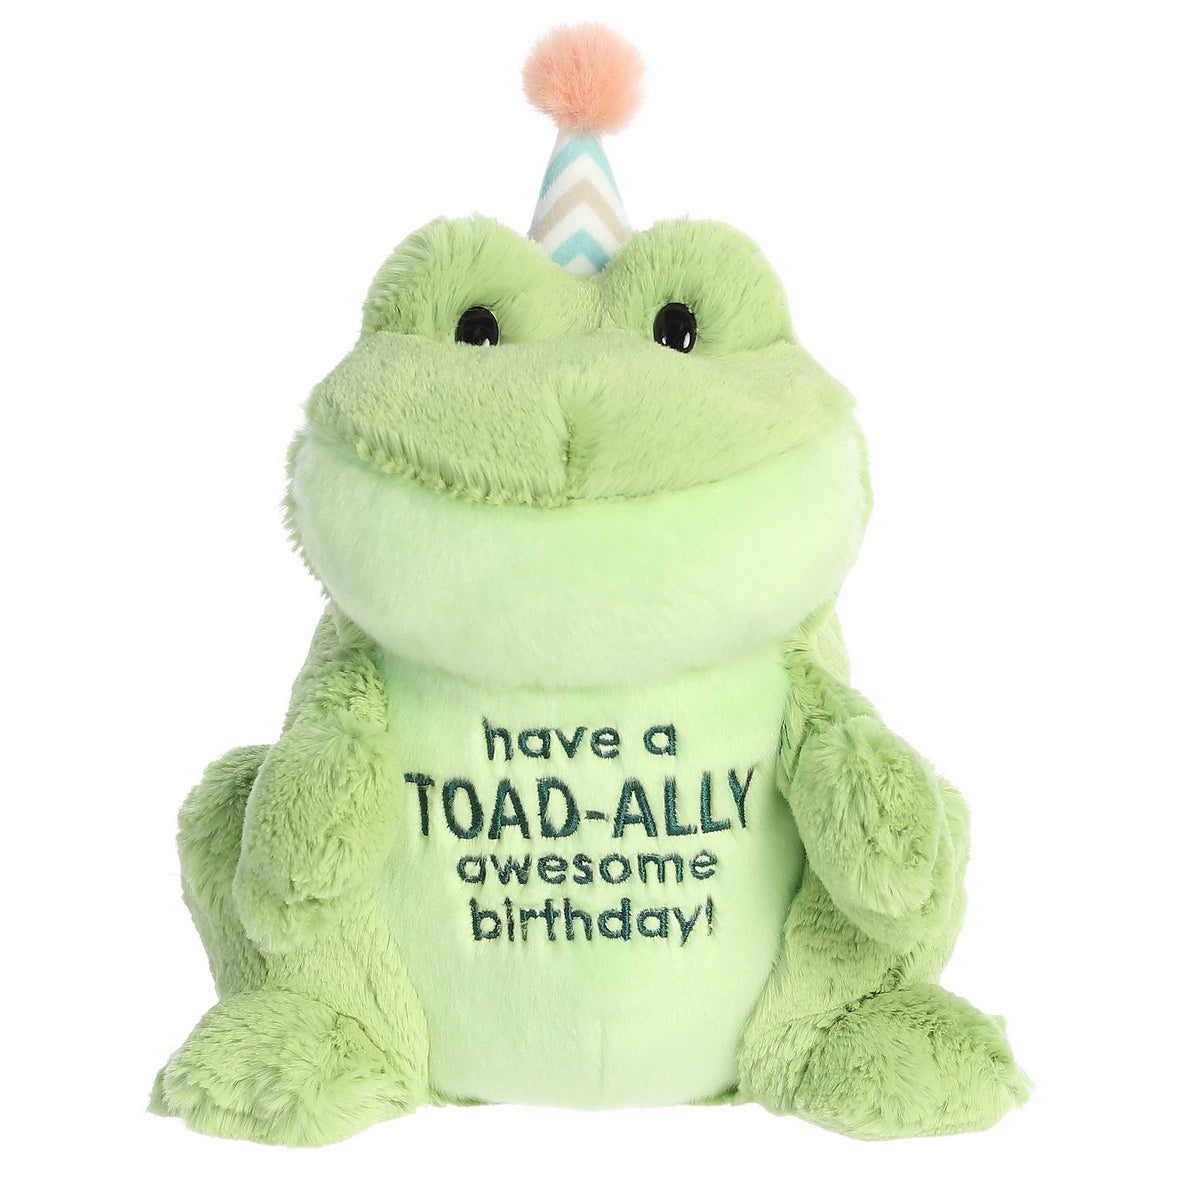 Cute frog plush toy with a green body, wearing a birthday hat, and "Have a TOAD-ALLY awesome birthday!" pun written across